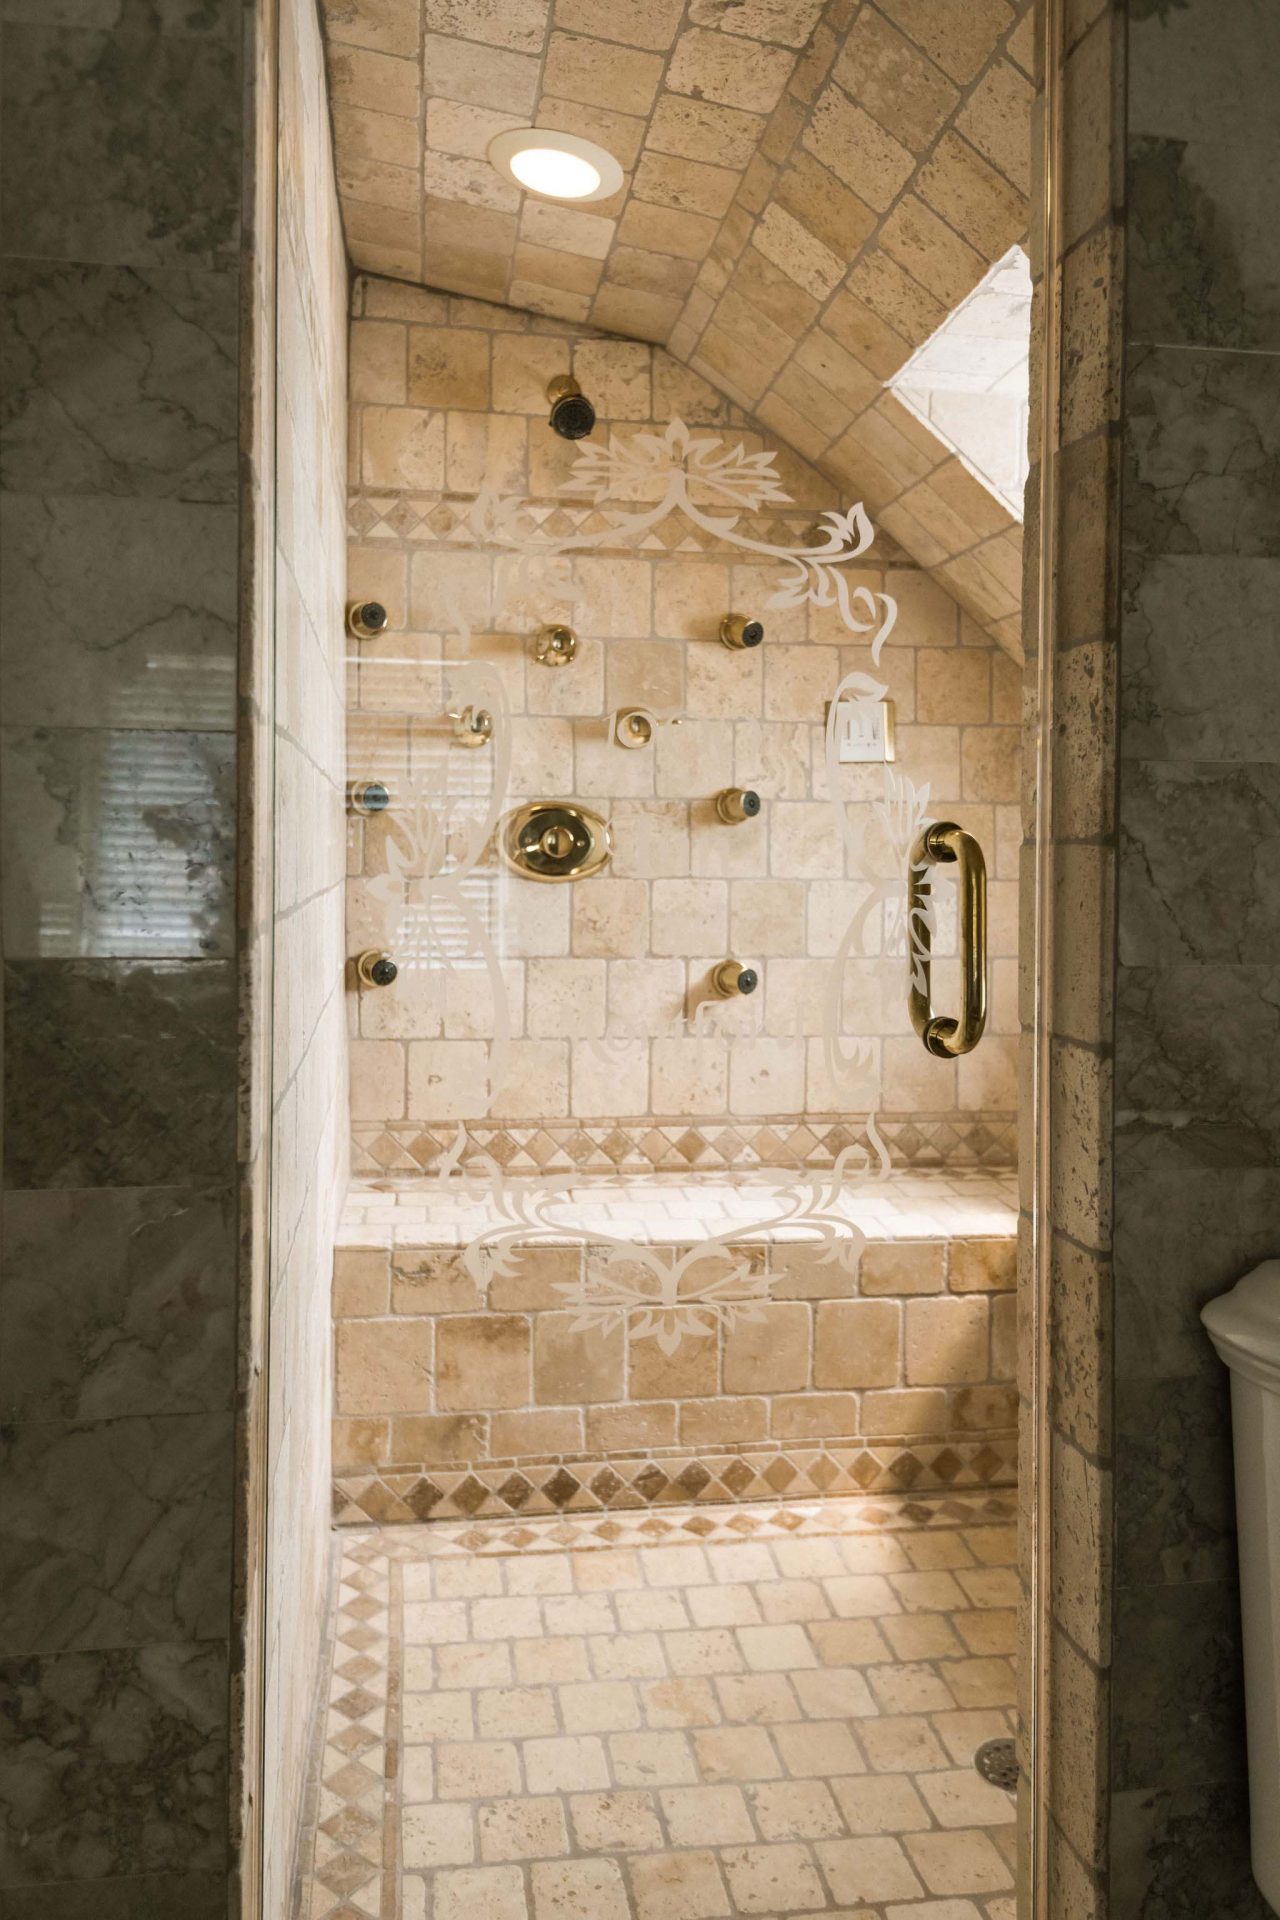 Private bathroom with beige, decorative tiles and a glass door, with a steam shower with multiple body jets.